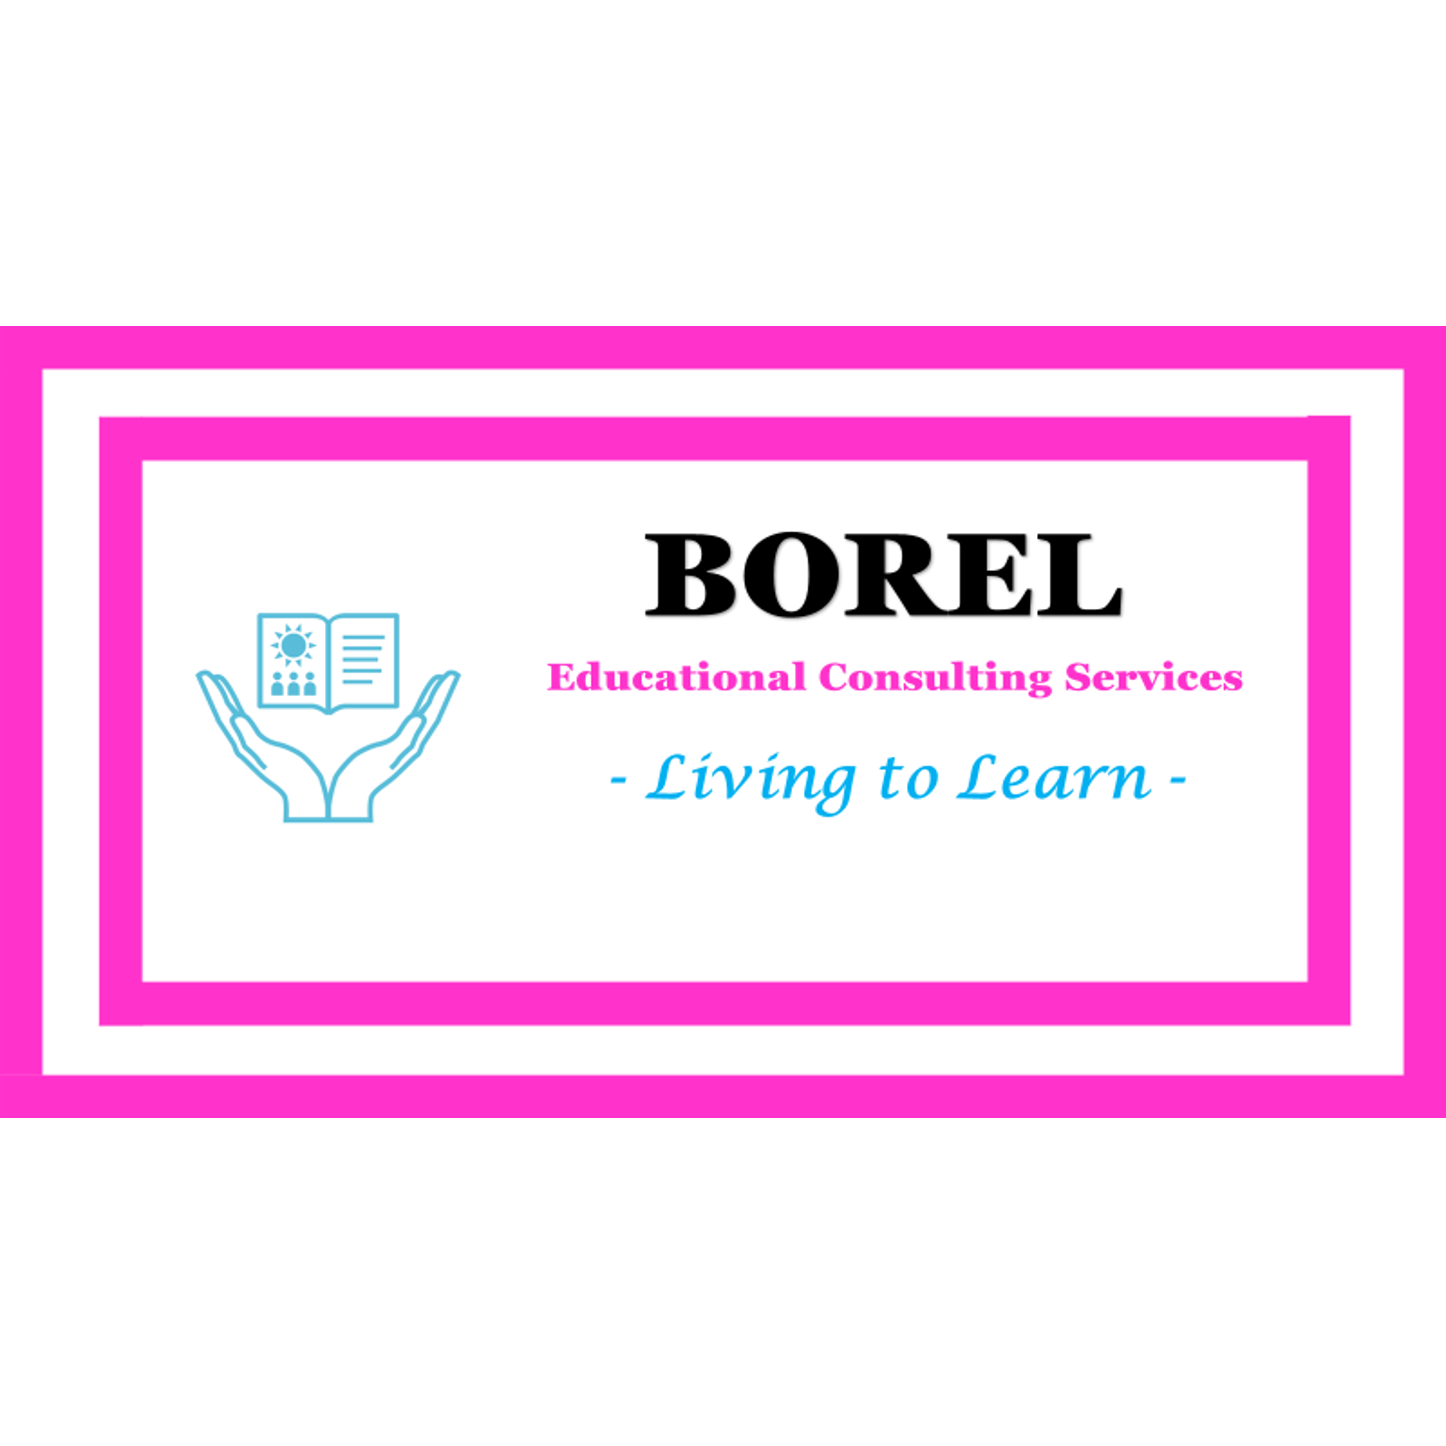 Borel Educational Consulting Service